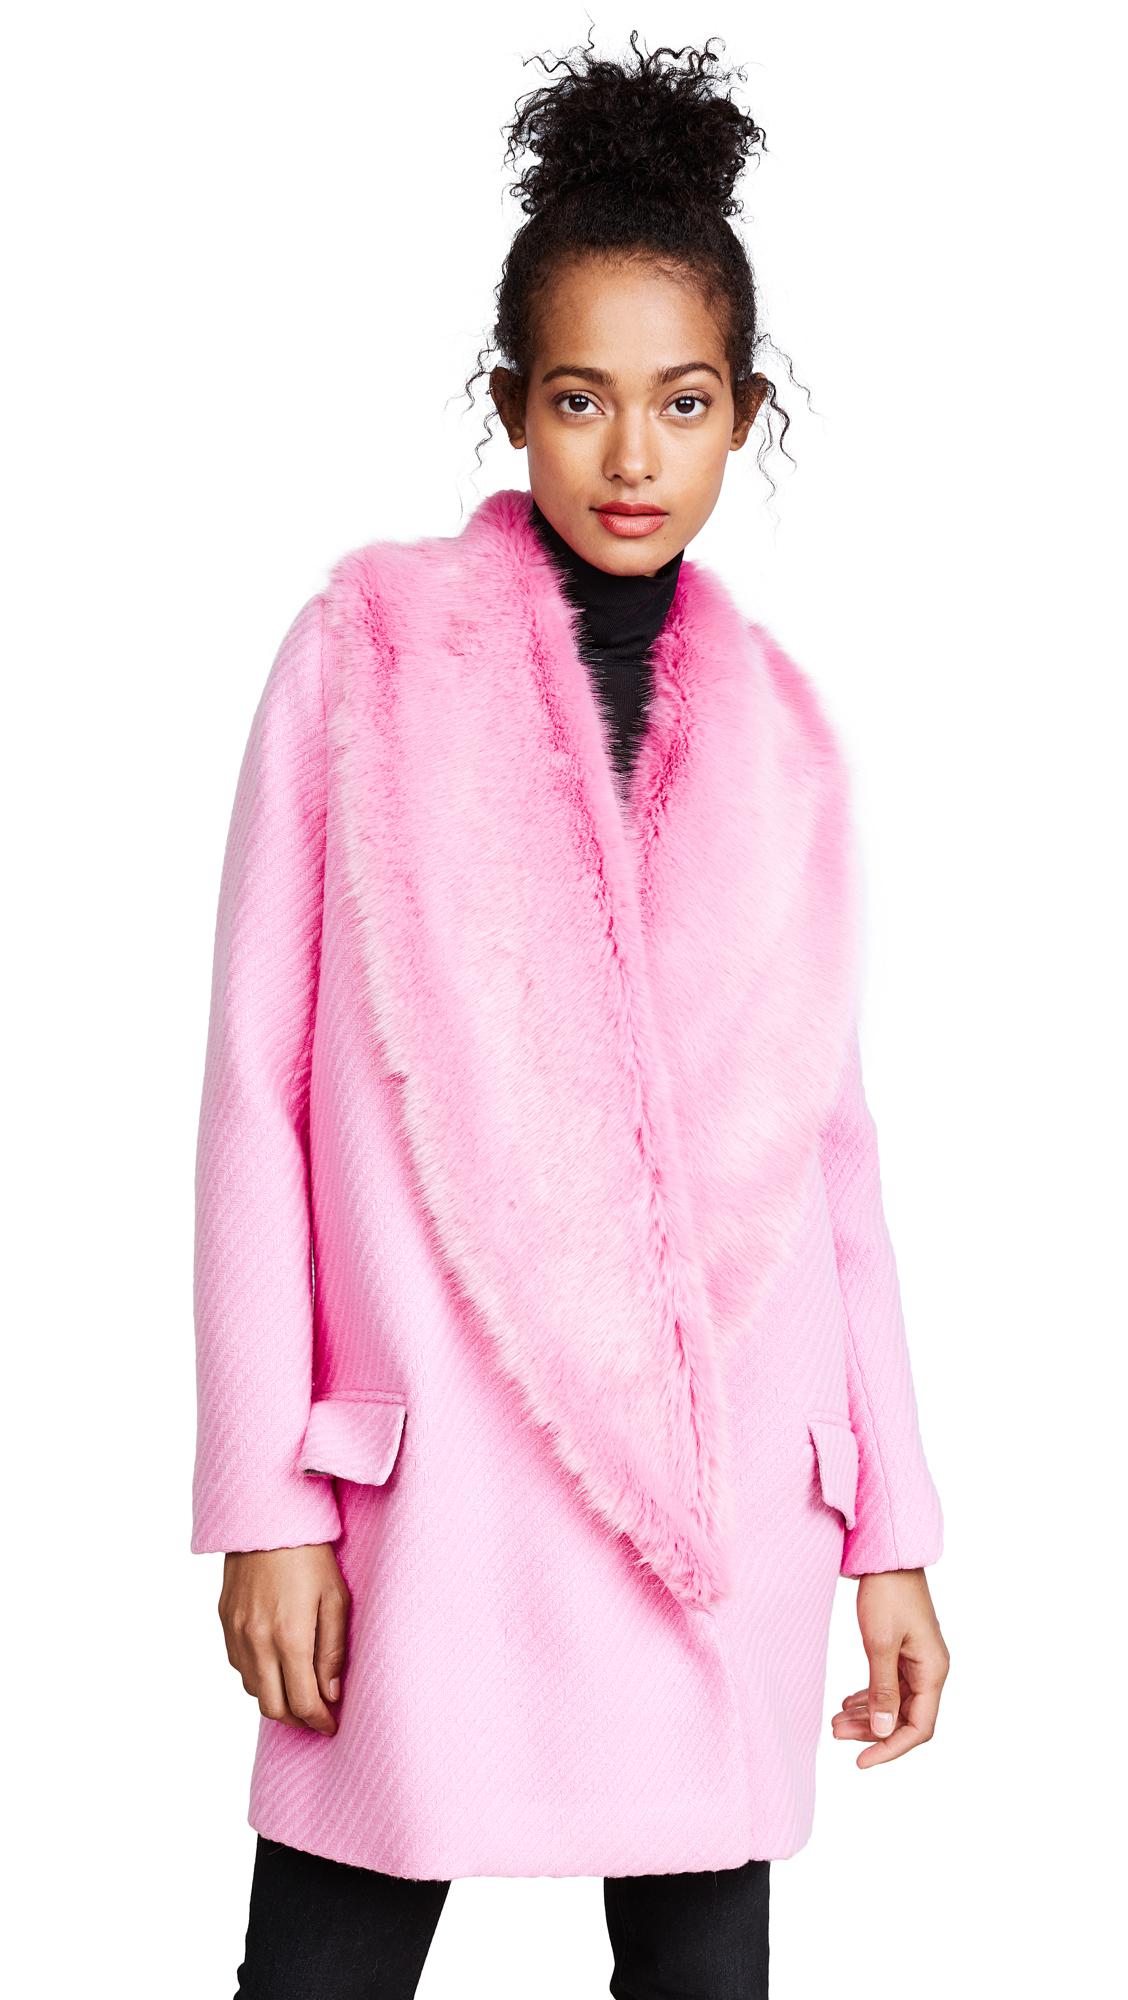 Lyst - Shrimps Rory Coat in Pink